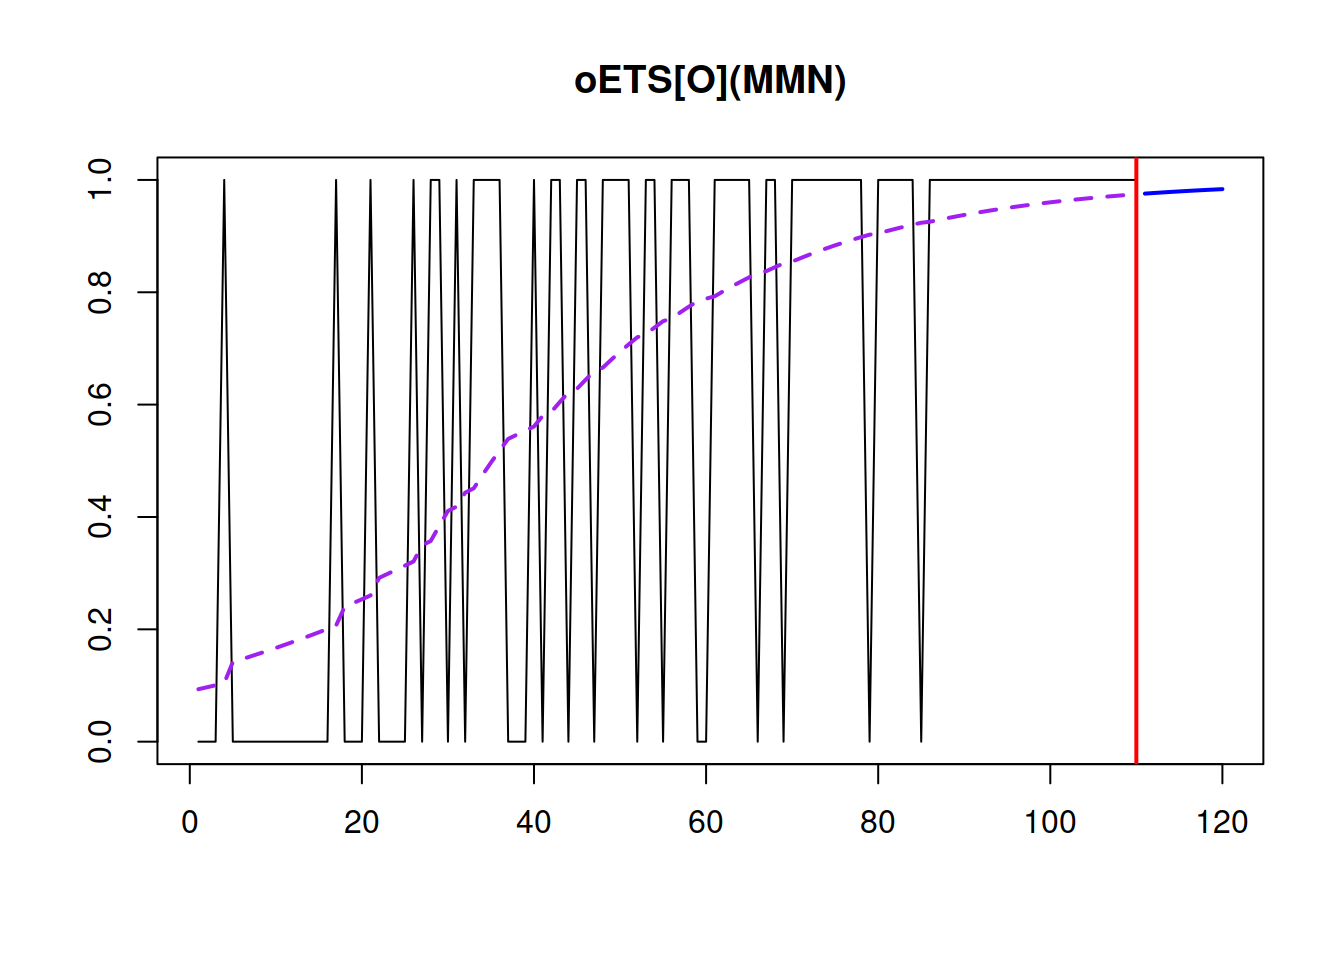 Demand occurrence and probability of occurrence in the oETS(M,M,N)$_O$ model.